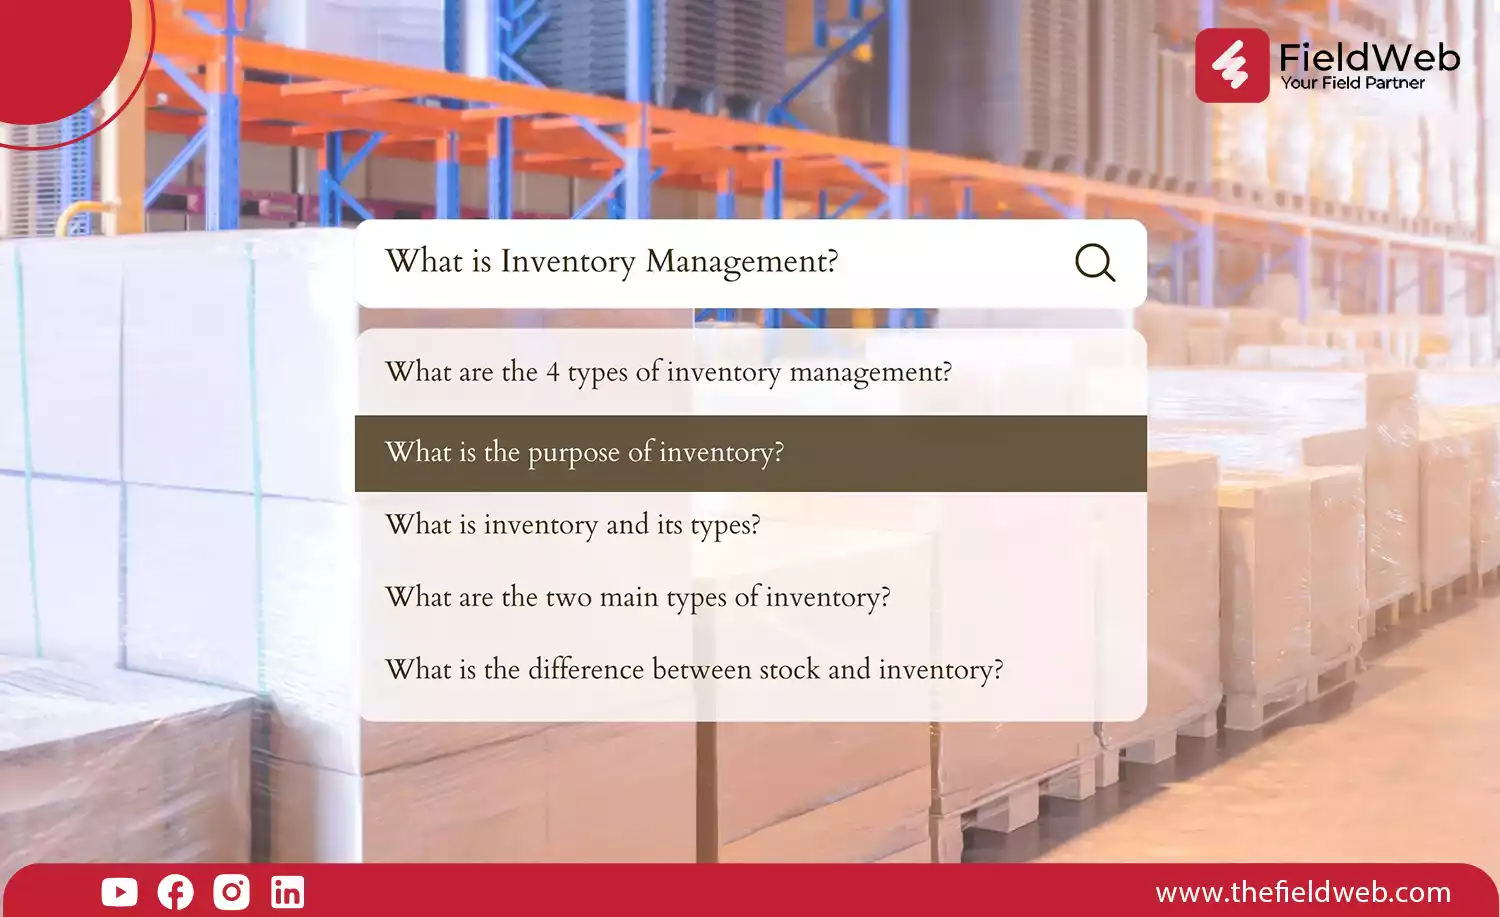 image is displaying top questions about inventory management